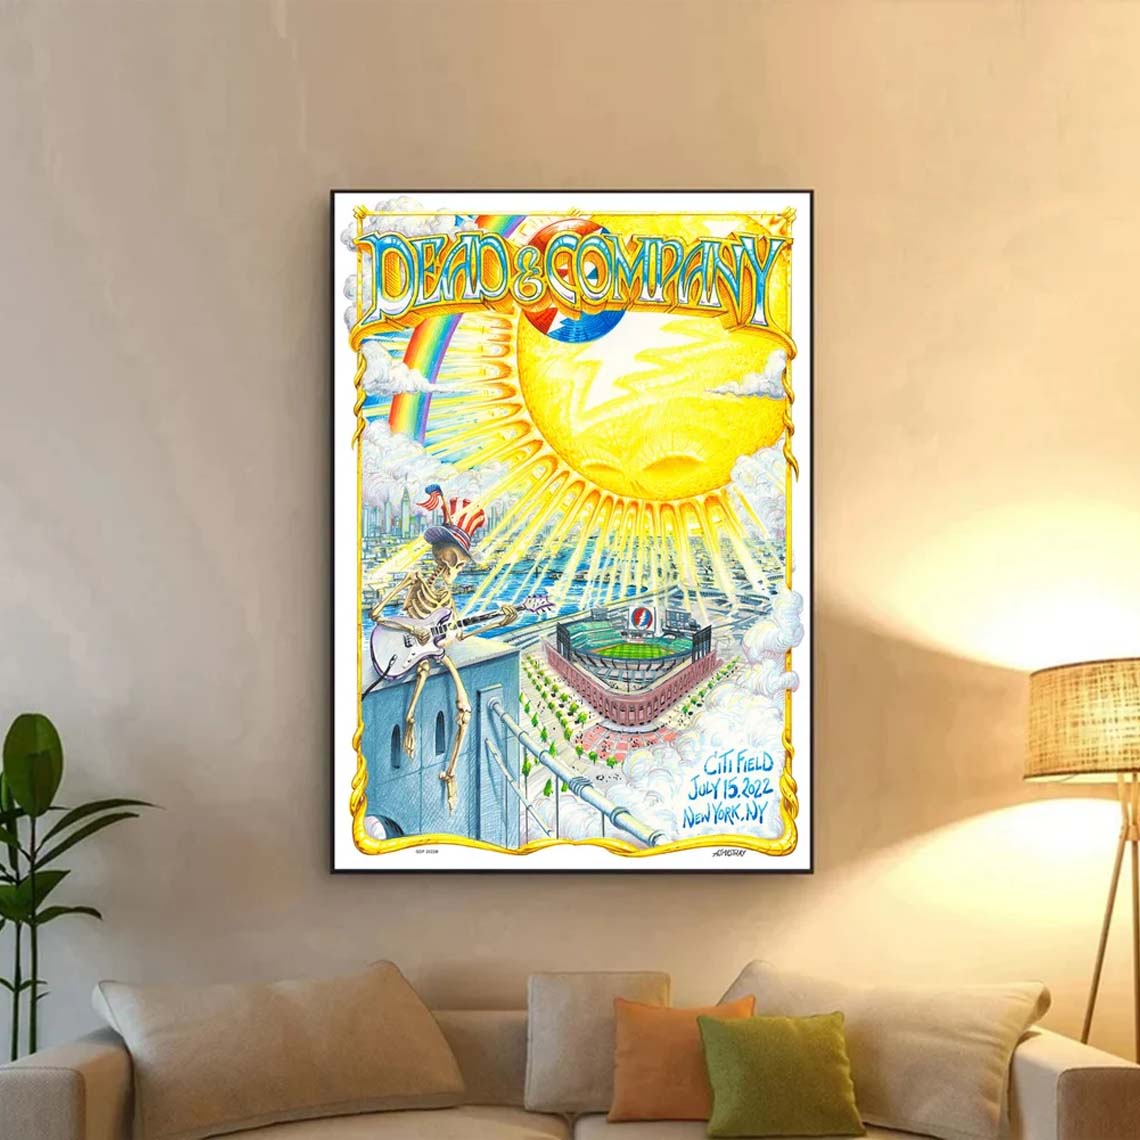 Dead and Company New York City Poster